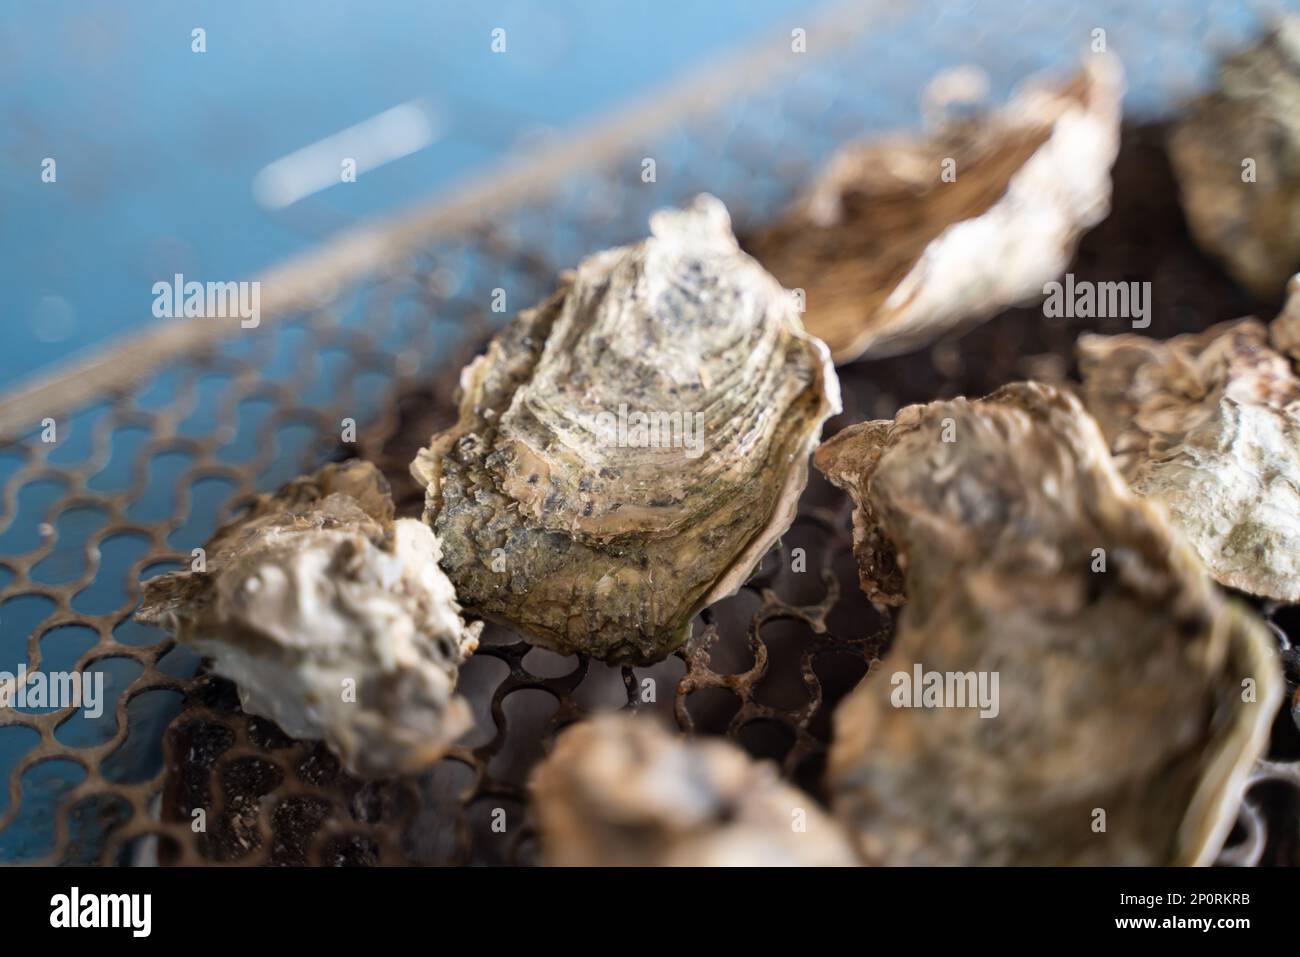 Grilled fresh oyster in Tainan, Taiwan, the famous Taiwanese street food gourmet. Stock Photo